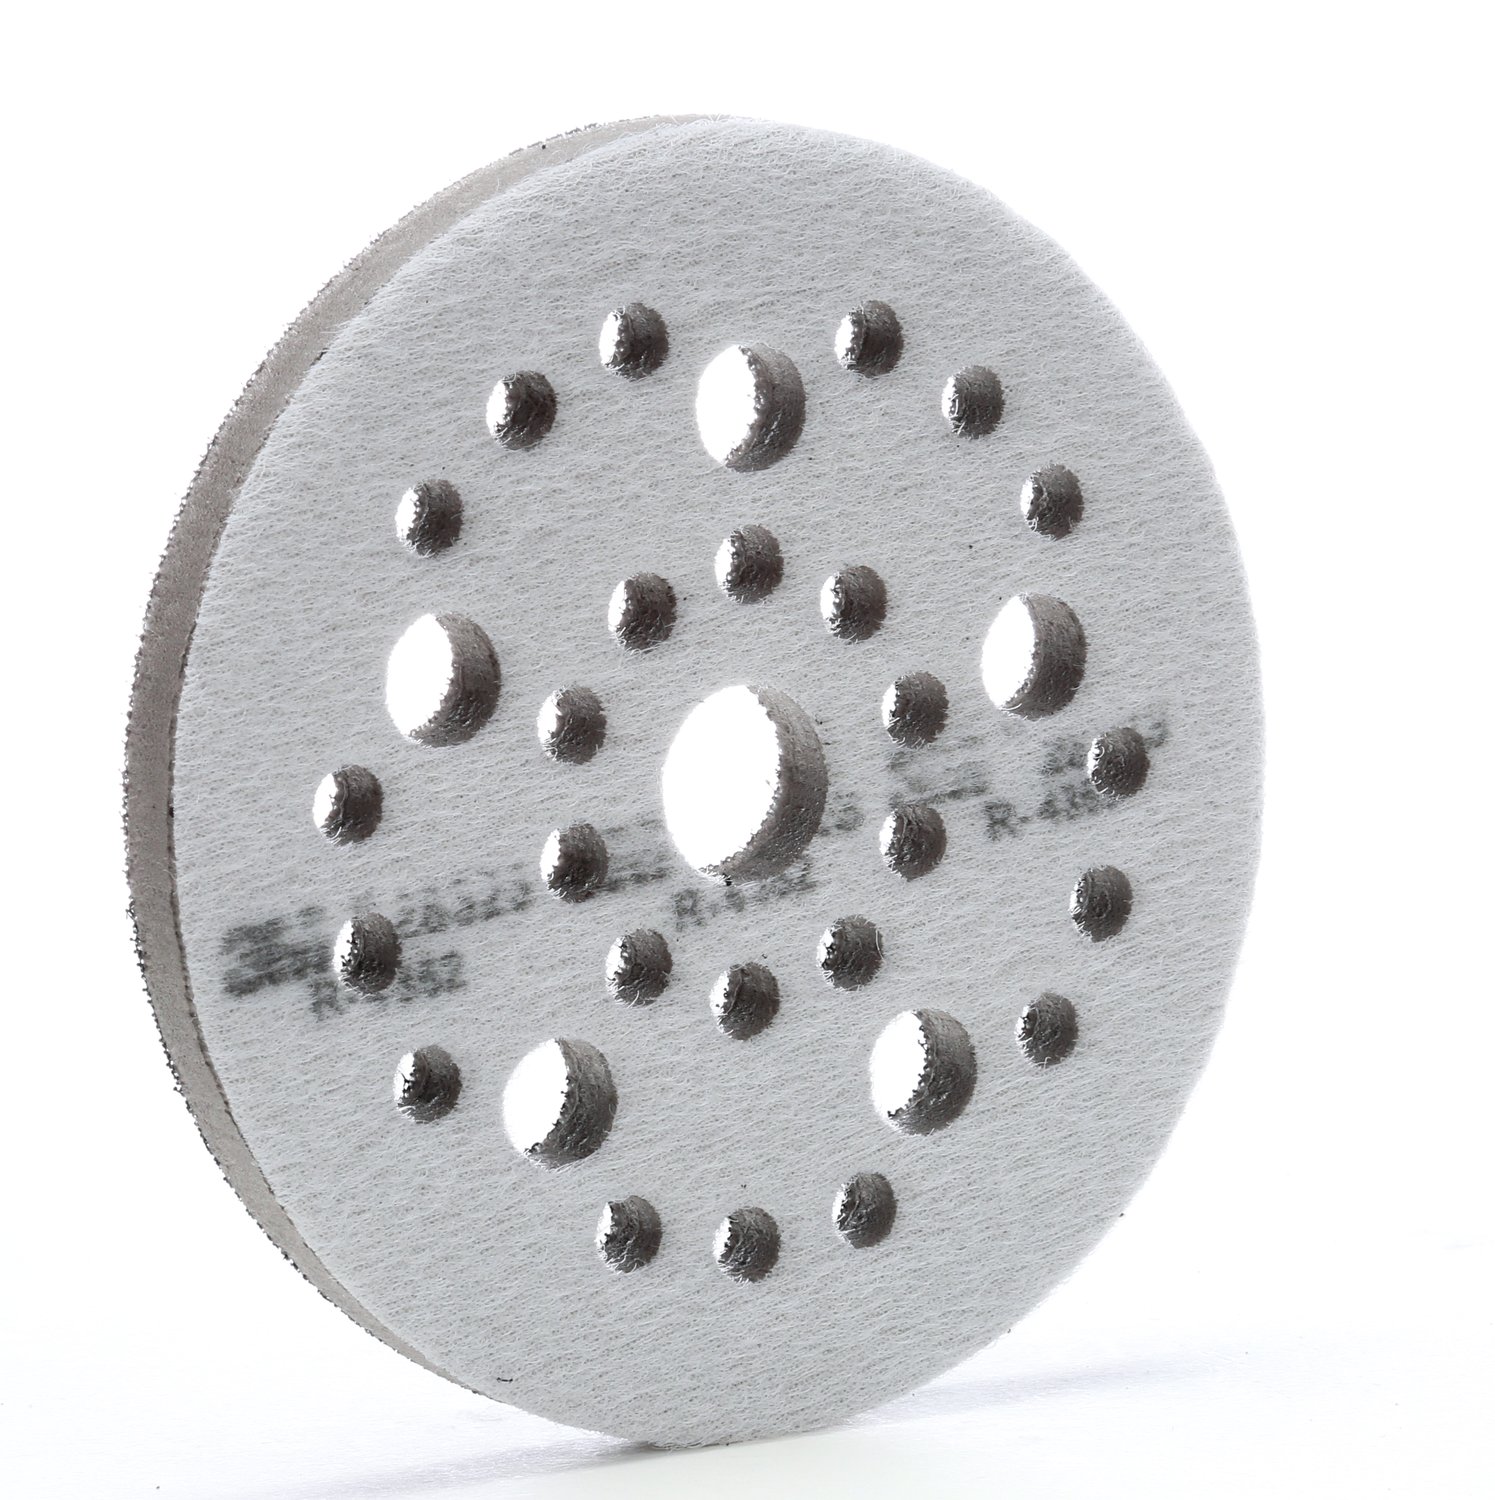 7100009701 - 3M Xtract Interface Disc Pad 28323, 5 in x 1/2 in x 3/4 in 31 Holes, 10 ea/Case